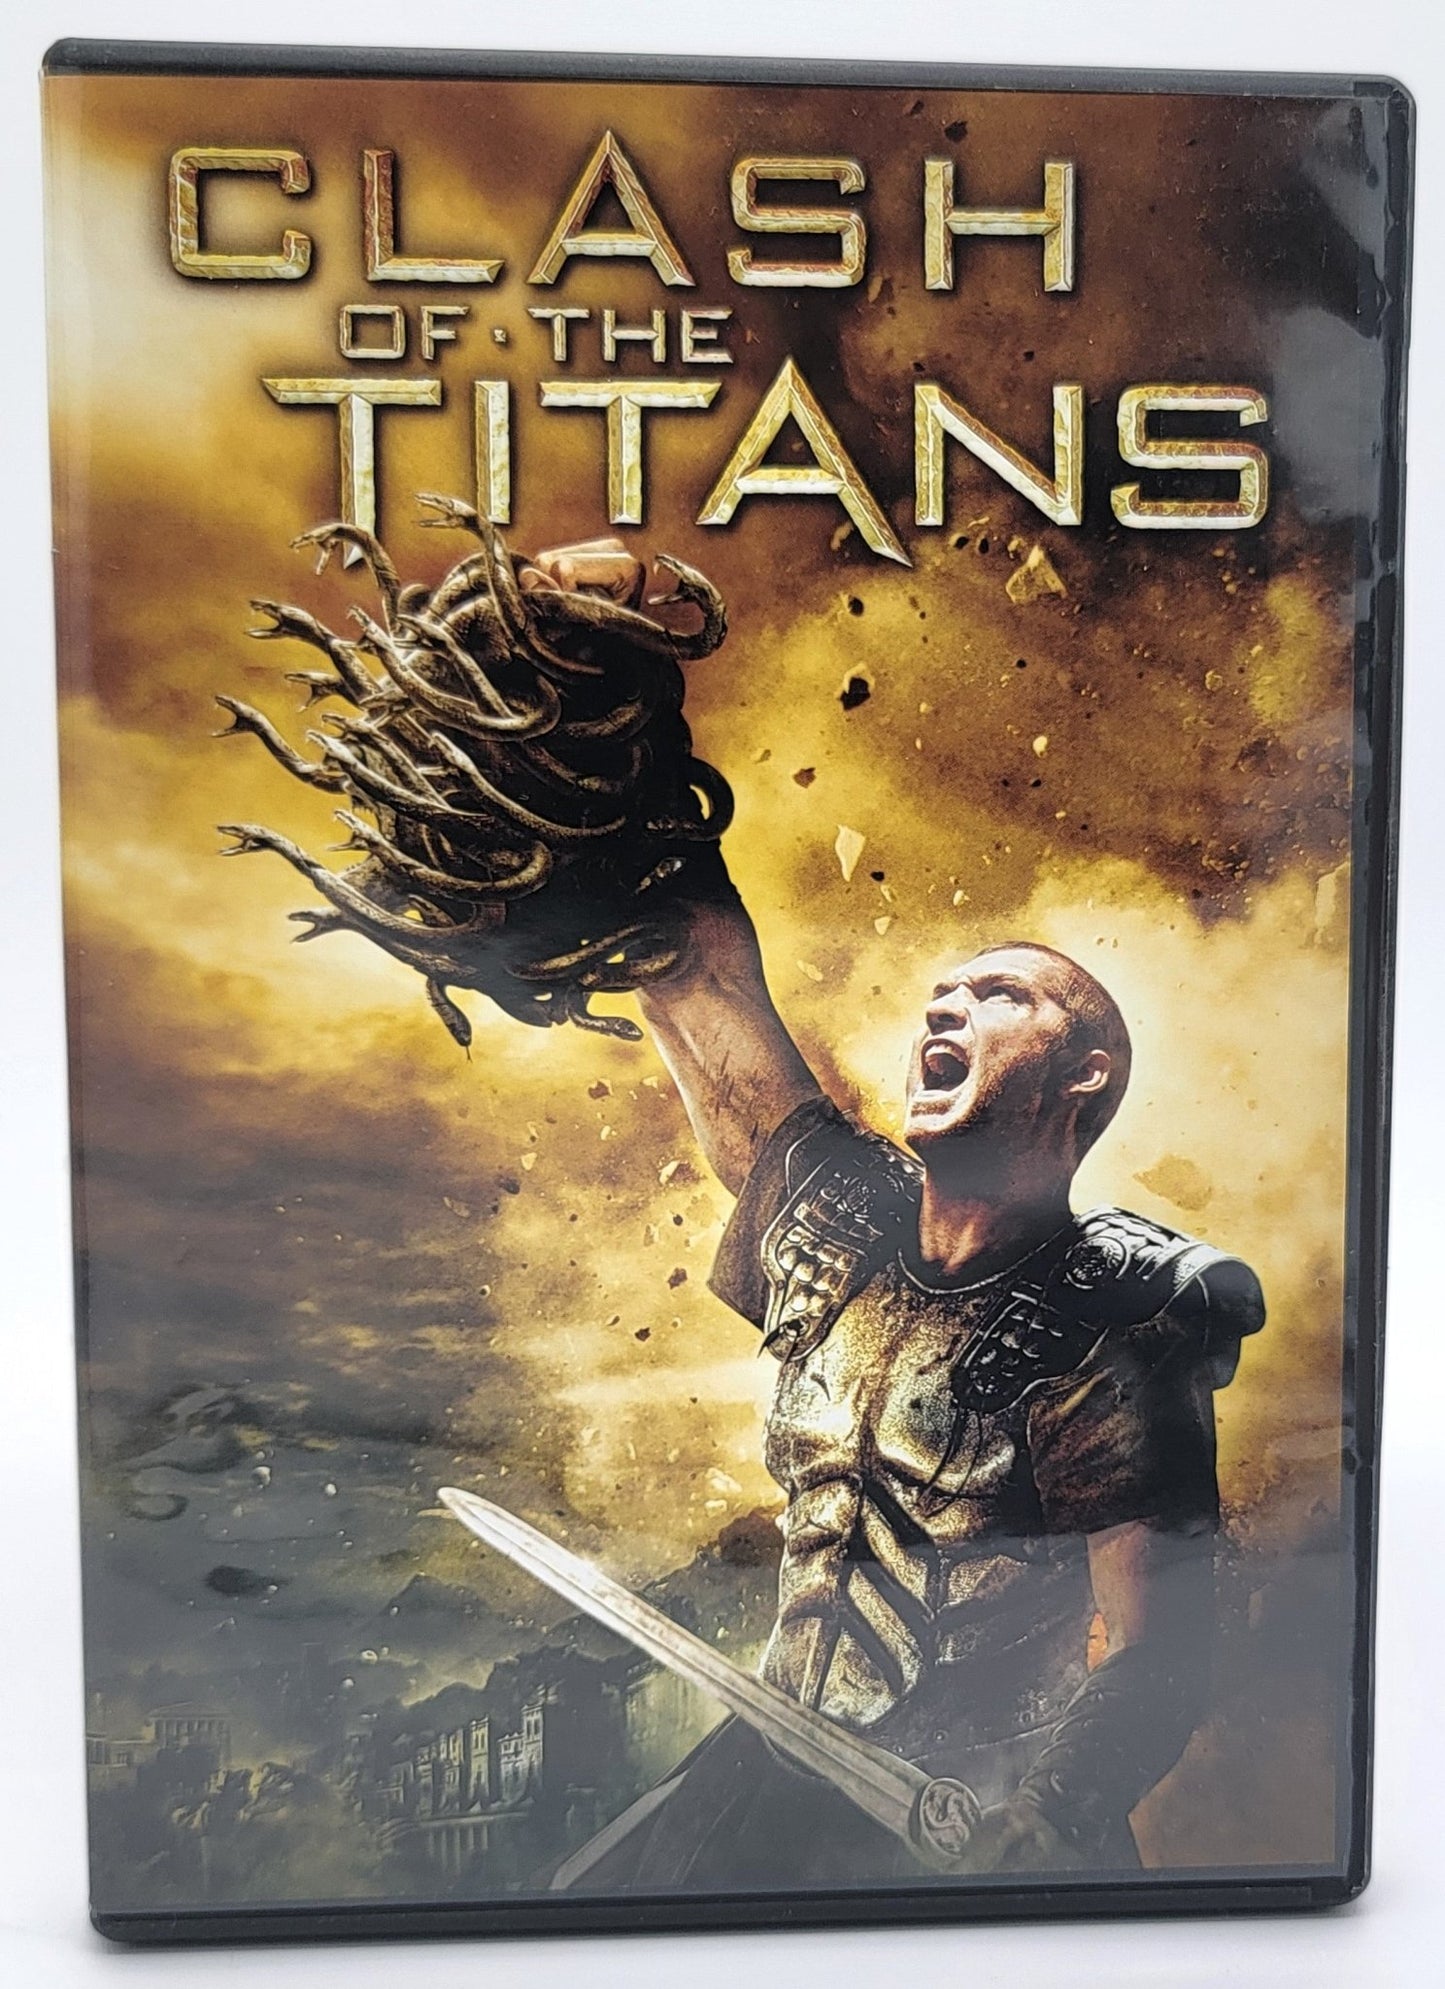 Warner Brothers - Clash of Titans | DVD | Widescreen - Release the Kraken - DVD - Steady Bunny Shop